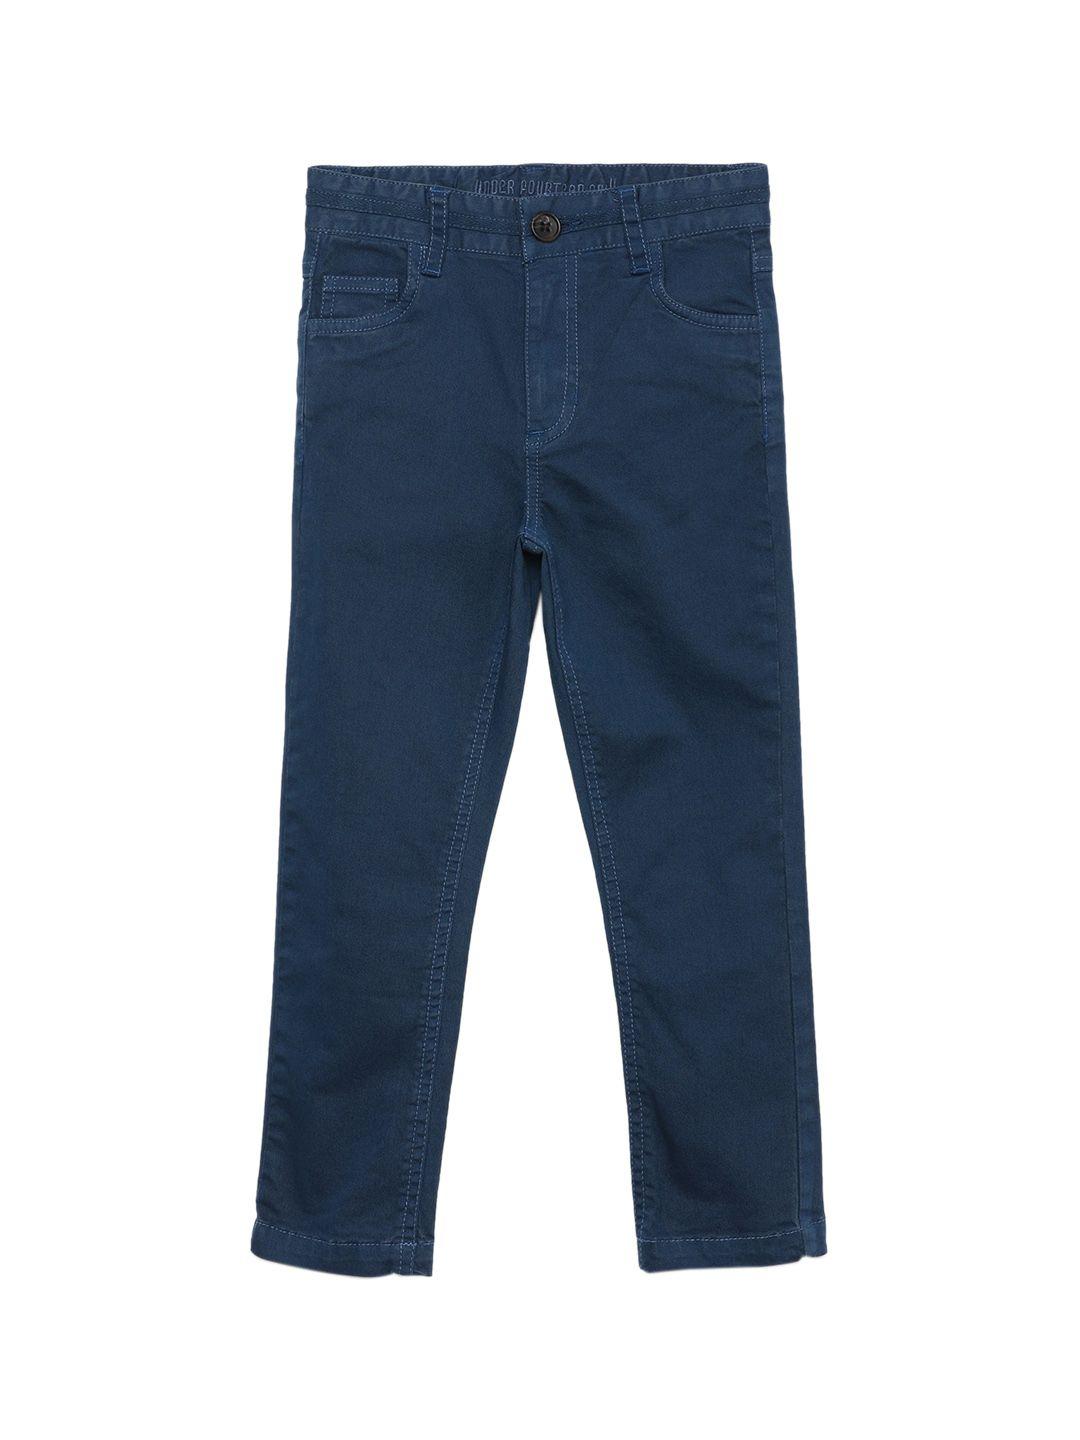 under fourteen only boys teal slim fit trousers